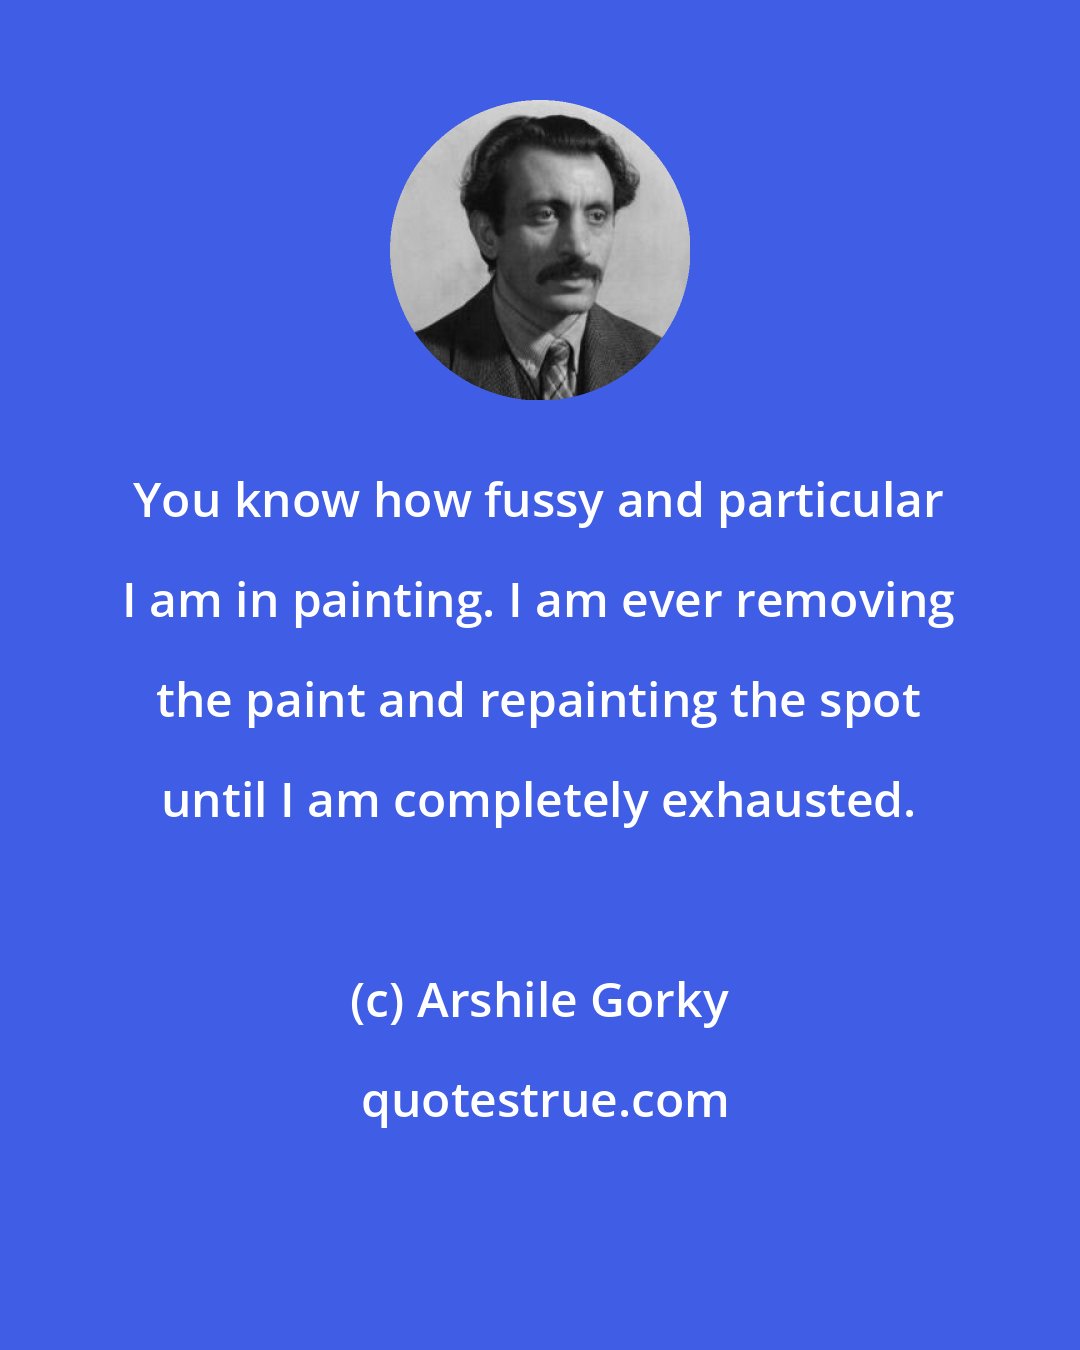 Arshile Gorky: You know how fussy and particular I am in painting. I am ever removing the paint and repainting the spot until I am completely exhausted.